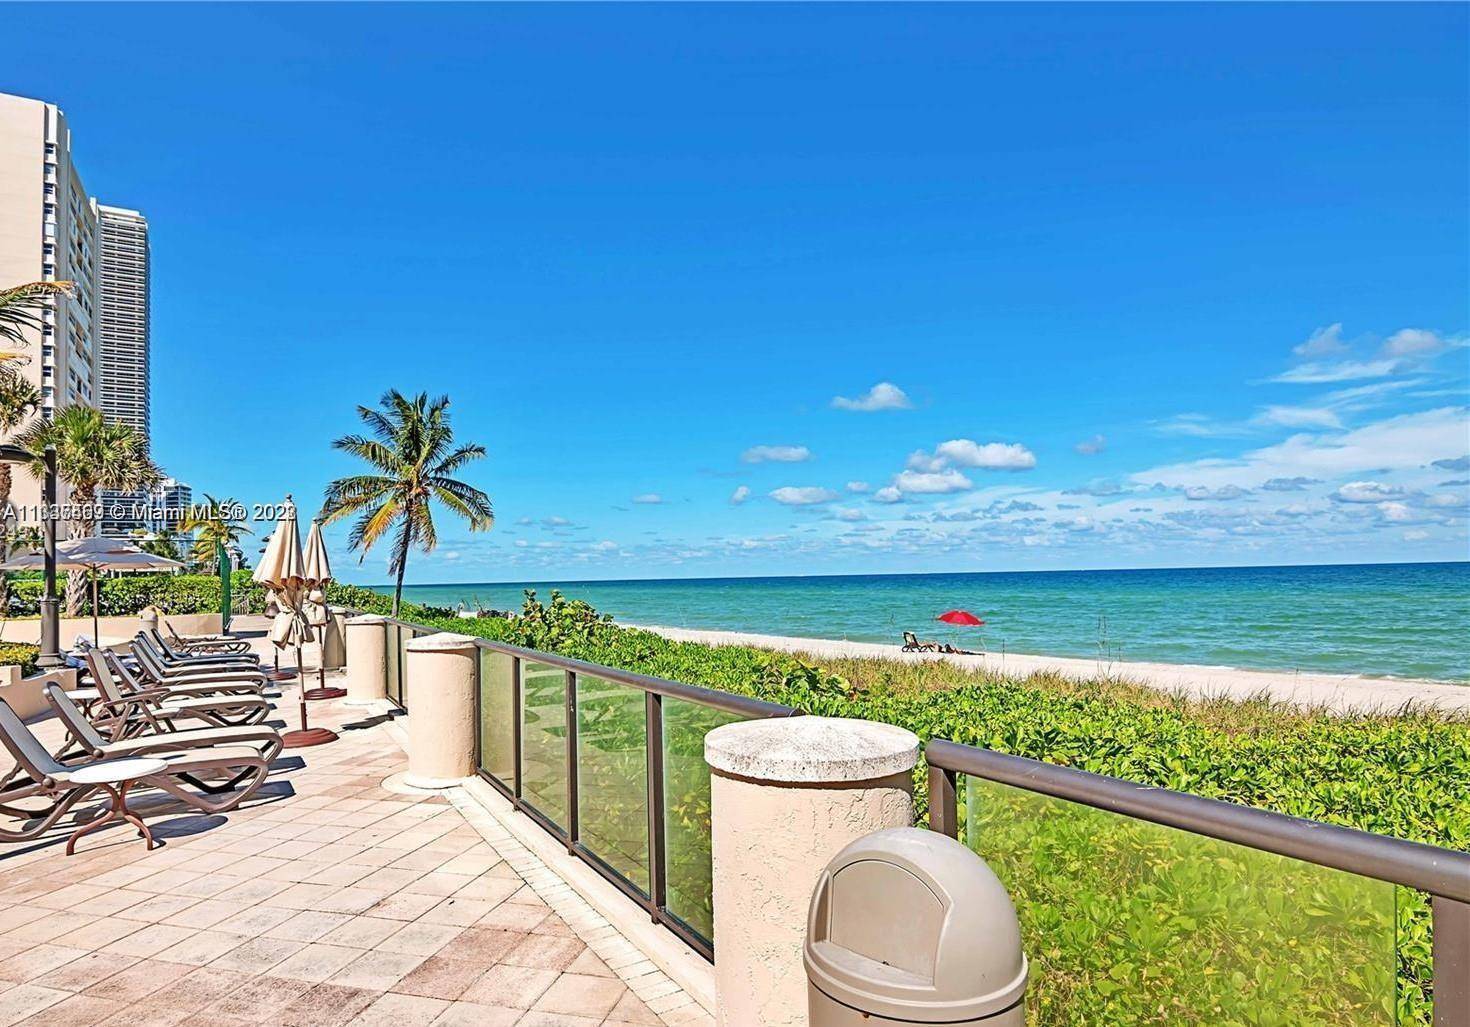 Freshly updated apartment with a direct ocean view from every room and kitchen in one of the best maintained buildings in Hallandale on the sand.